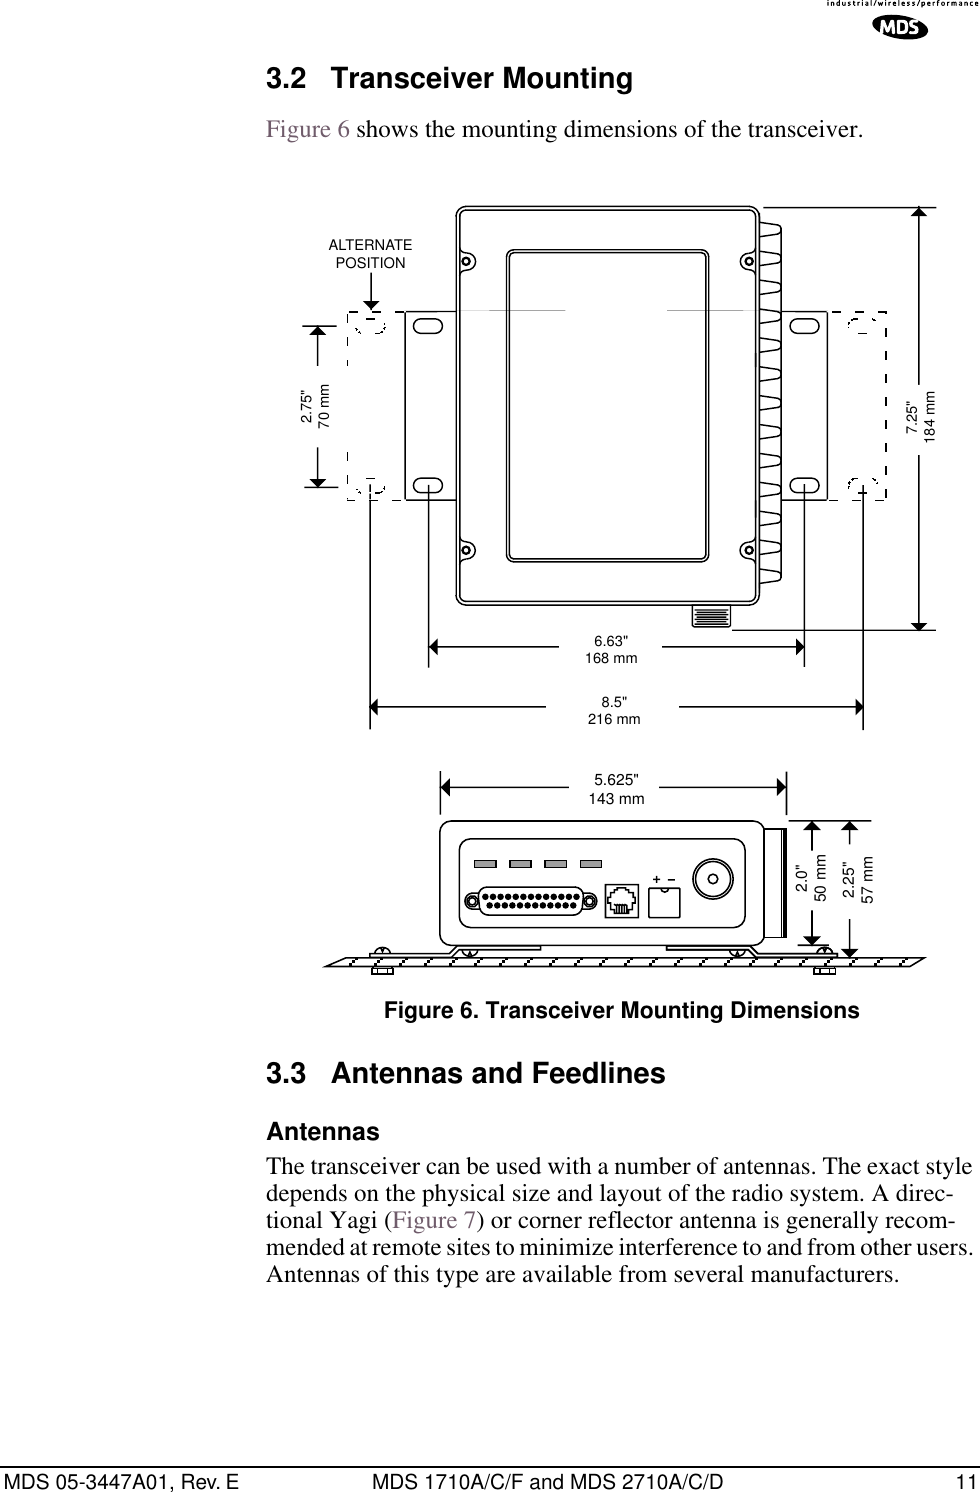 MDS 05-3447A01, Rev. E MDS 1710A/C/F and MDS 2710A/C/D 113.2 Transceiver MountingFigure 6 shows the mounting dimensions of the transceiver.Invisible place holderFigure 6. Transceiver Mounting Dimensions3.3 Antennas and FeedlinesAntennasThe transceiver can be used with a number of antennas. The exact style depends on the physical size and layout of the radio system. A direc-tional Yagi (Figure 7) or corner reflector antenna is generally recom-mended at remote sites to minimize interference to and from other users. Antennas of this type are available from several manufacturers.8.5&quot;216 mm1.75&quot;4.44 CM6.63&quot;168 mm2.75&quot;70 mm7.25&quot;184 mmALTERNATEPOSITION5.625&quot;143 mm2.25&quot;57 mm2.0&quot;50 mm